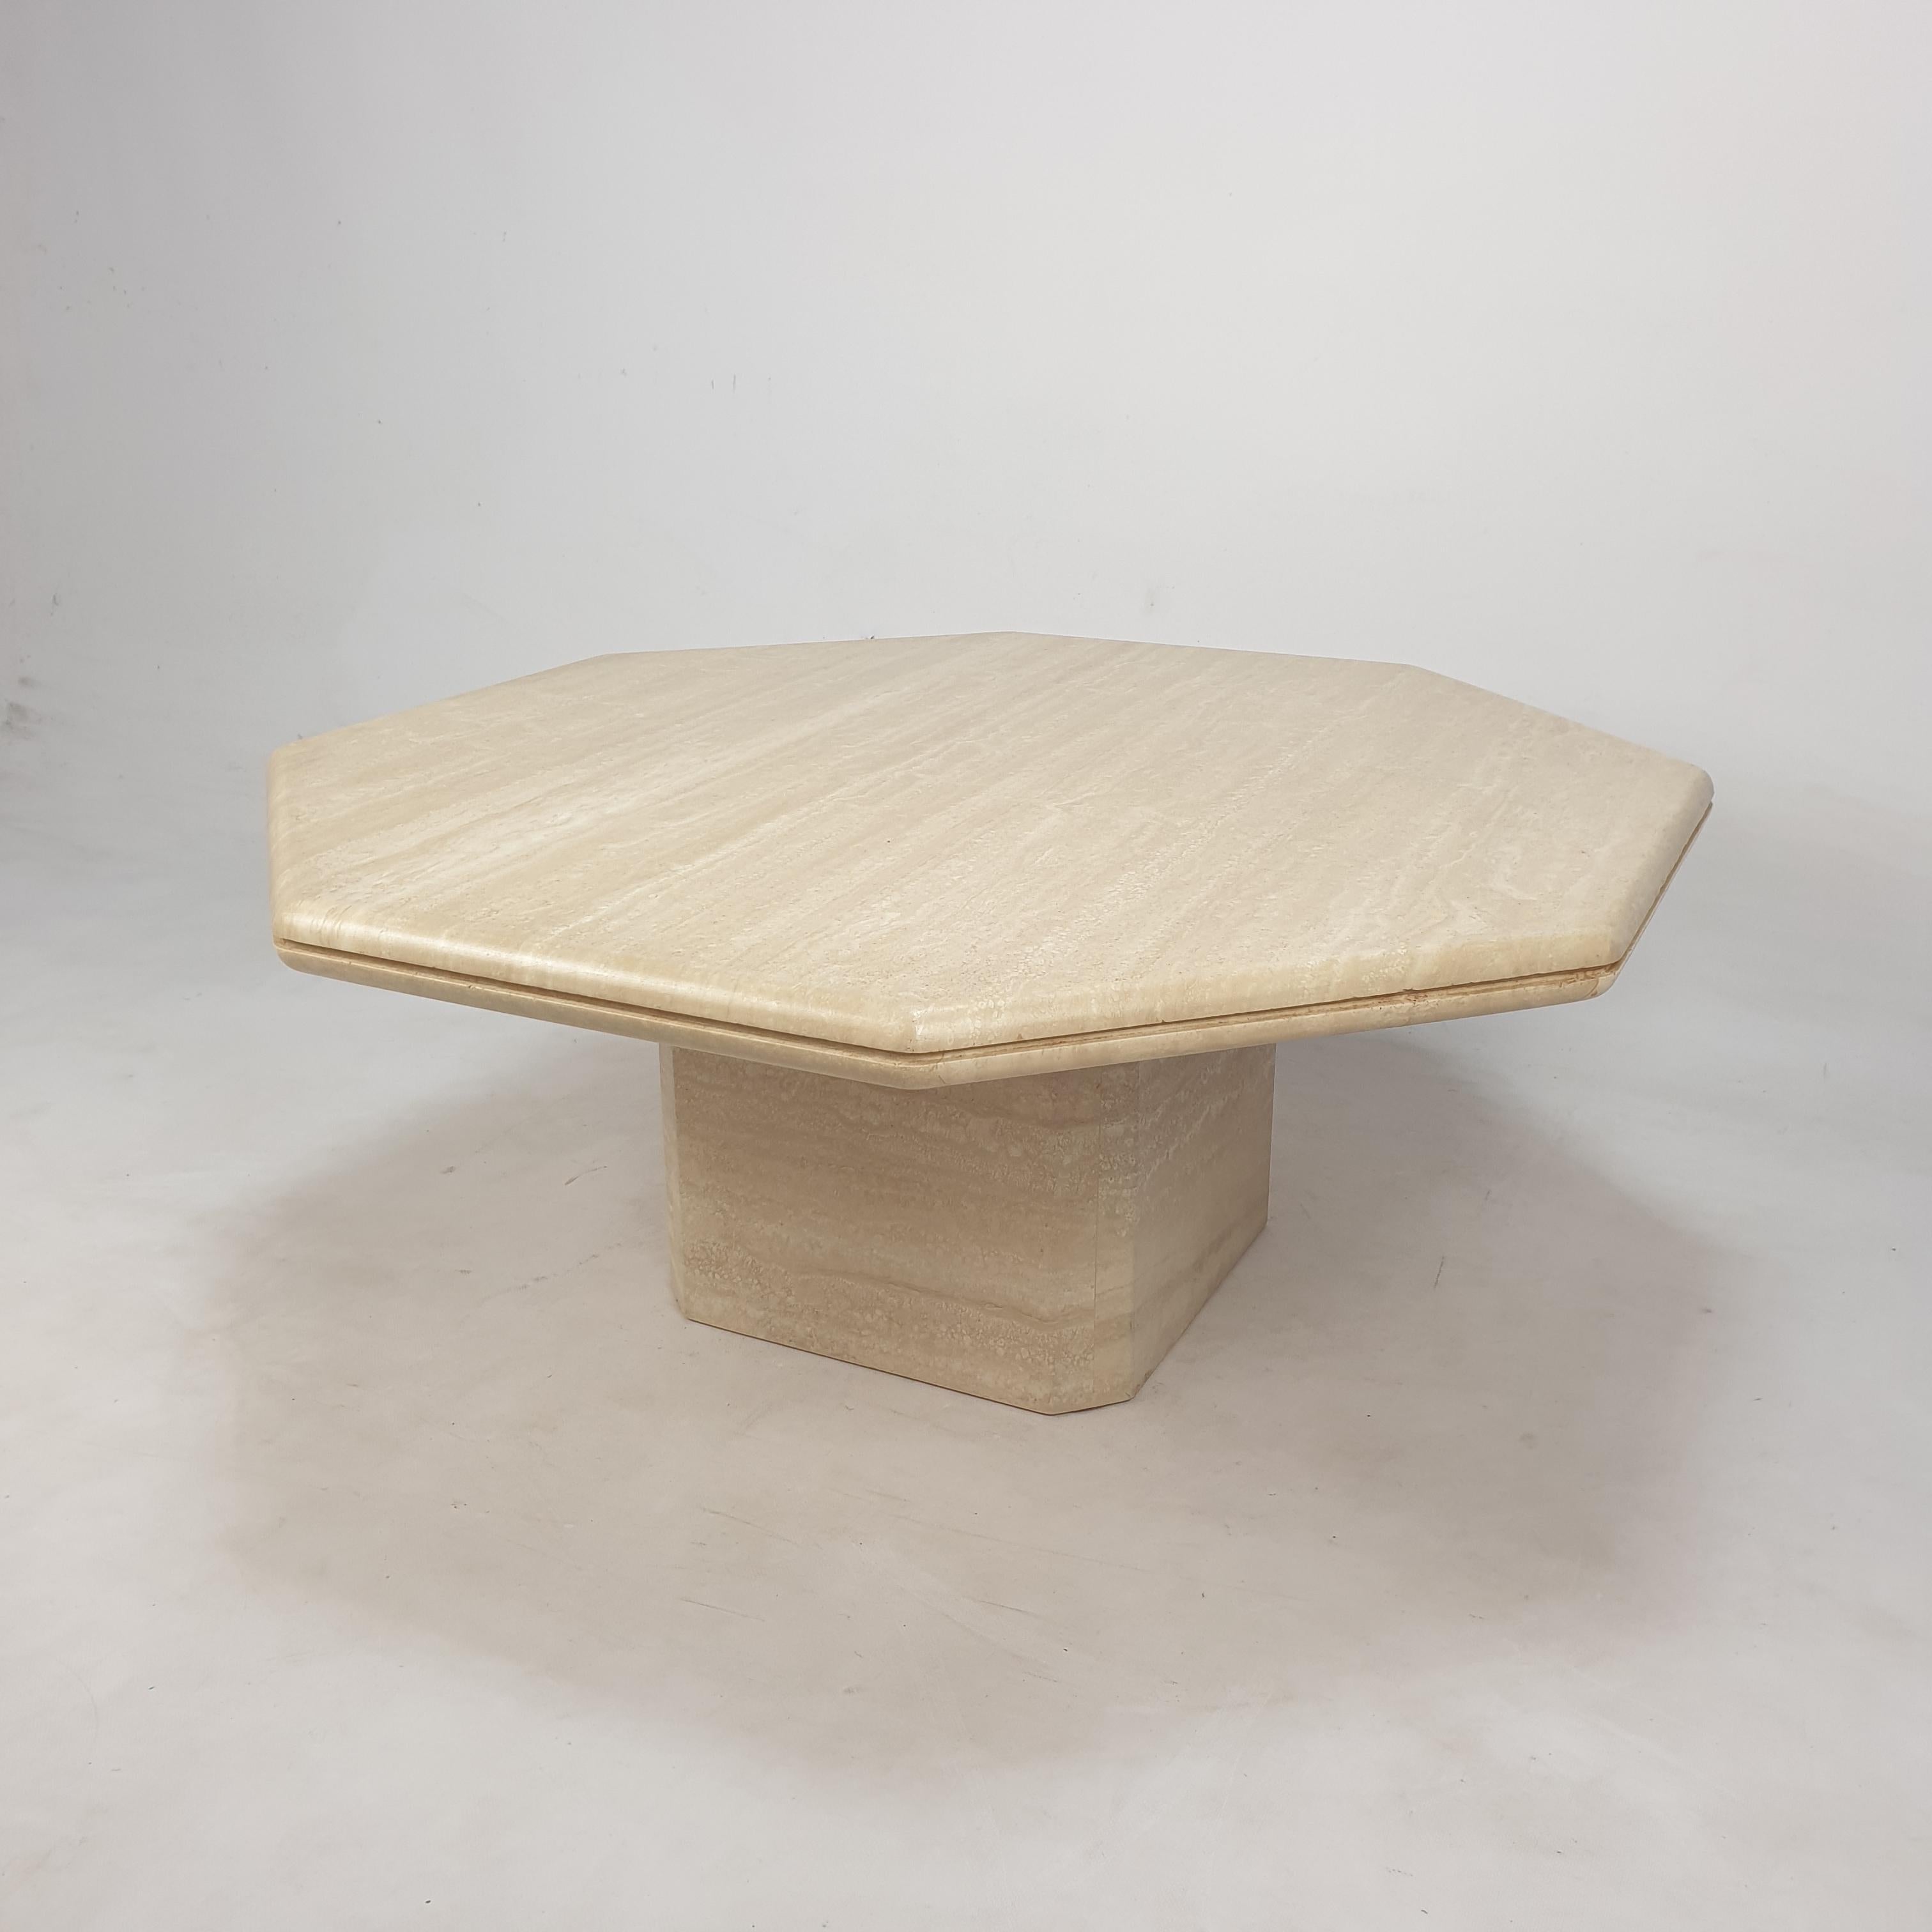 Italian Octagon Coffee Table in Travertine, 1980s For Sale 4